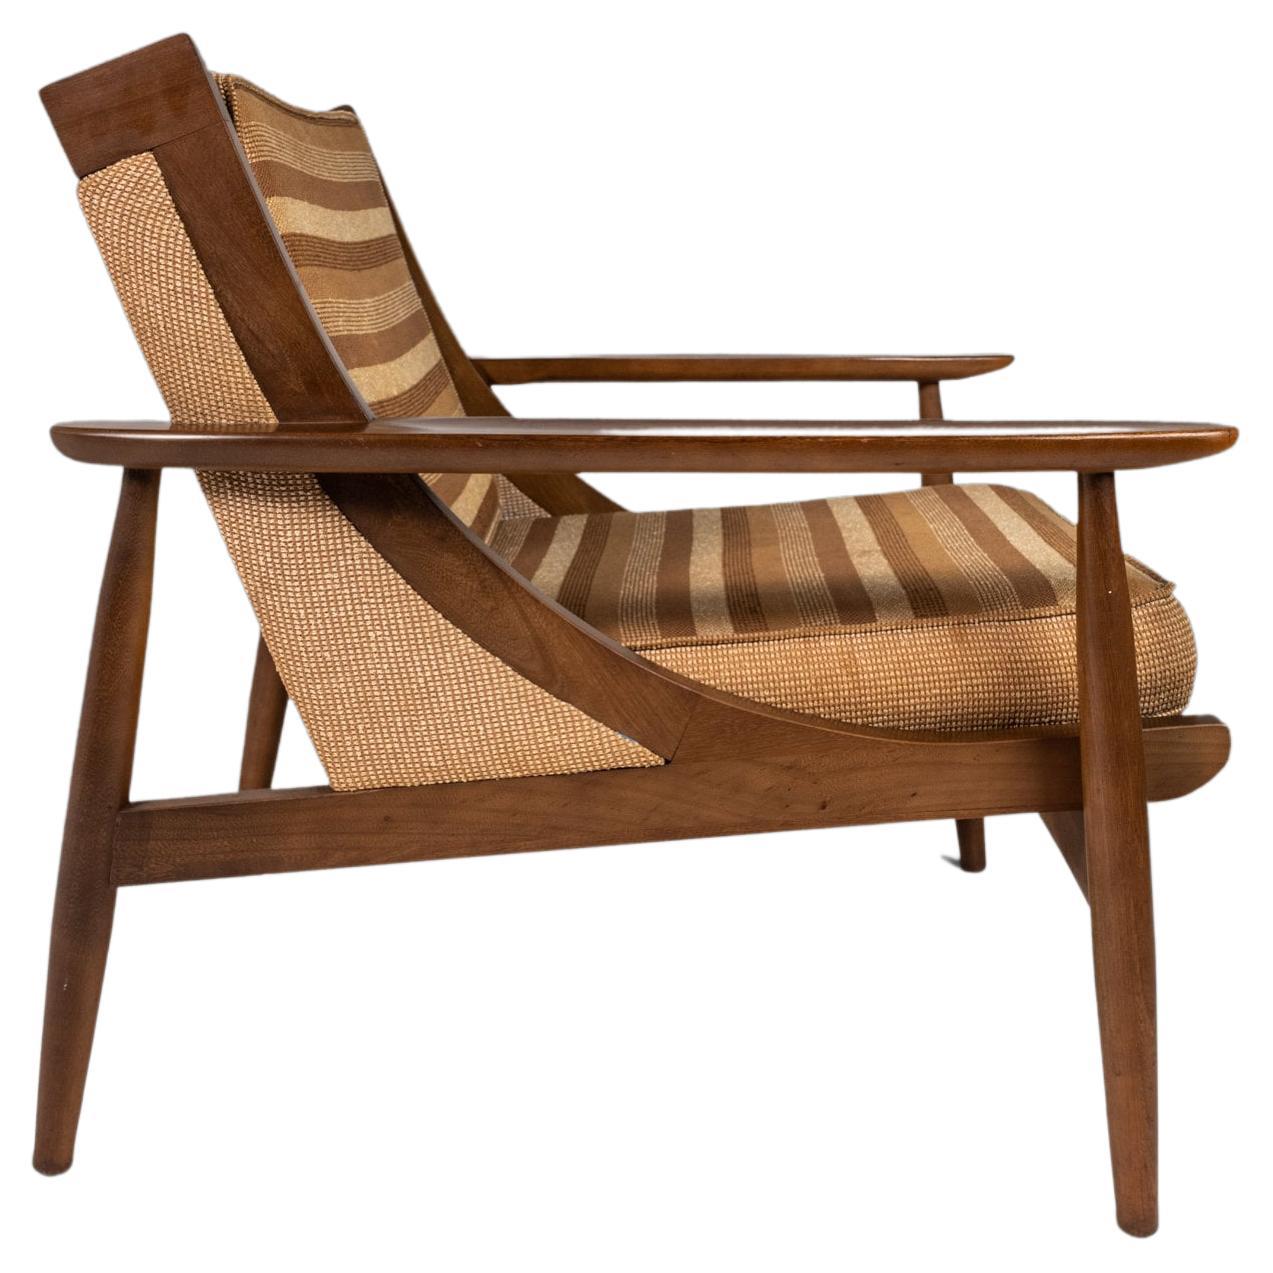 Mid Century Modern Lounge Chair After Selig in Walnut & Original Fabric, USA